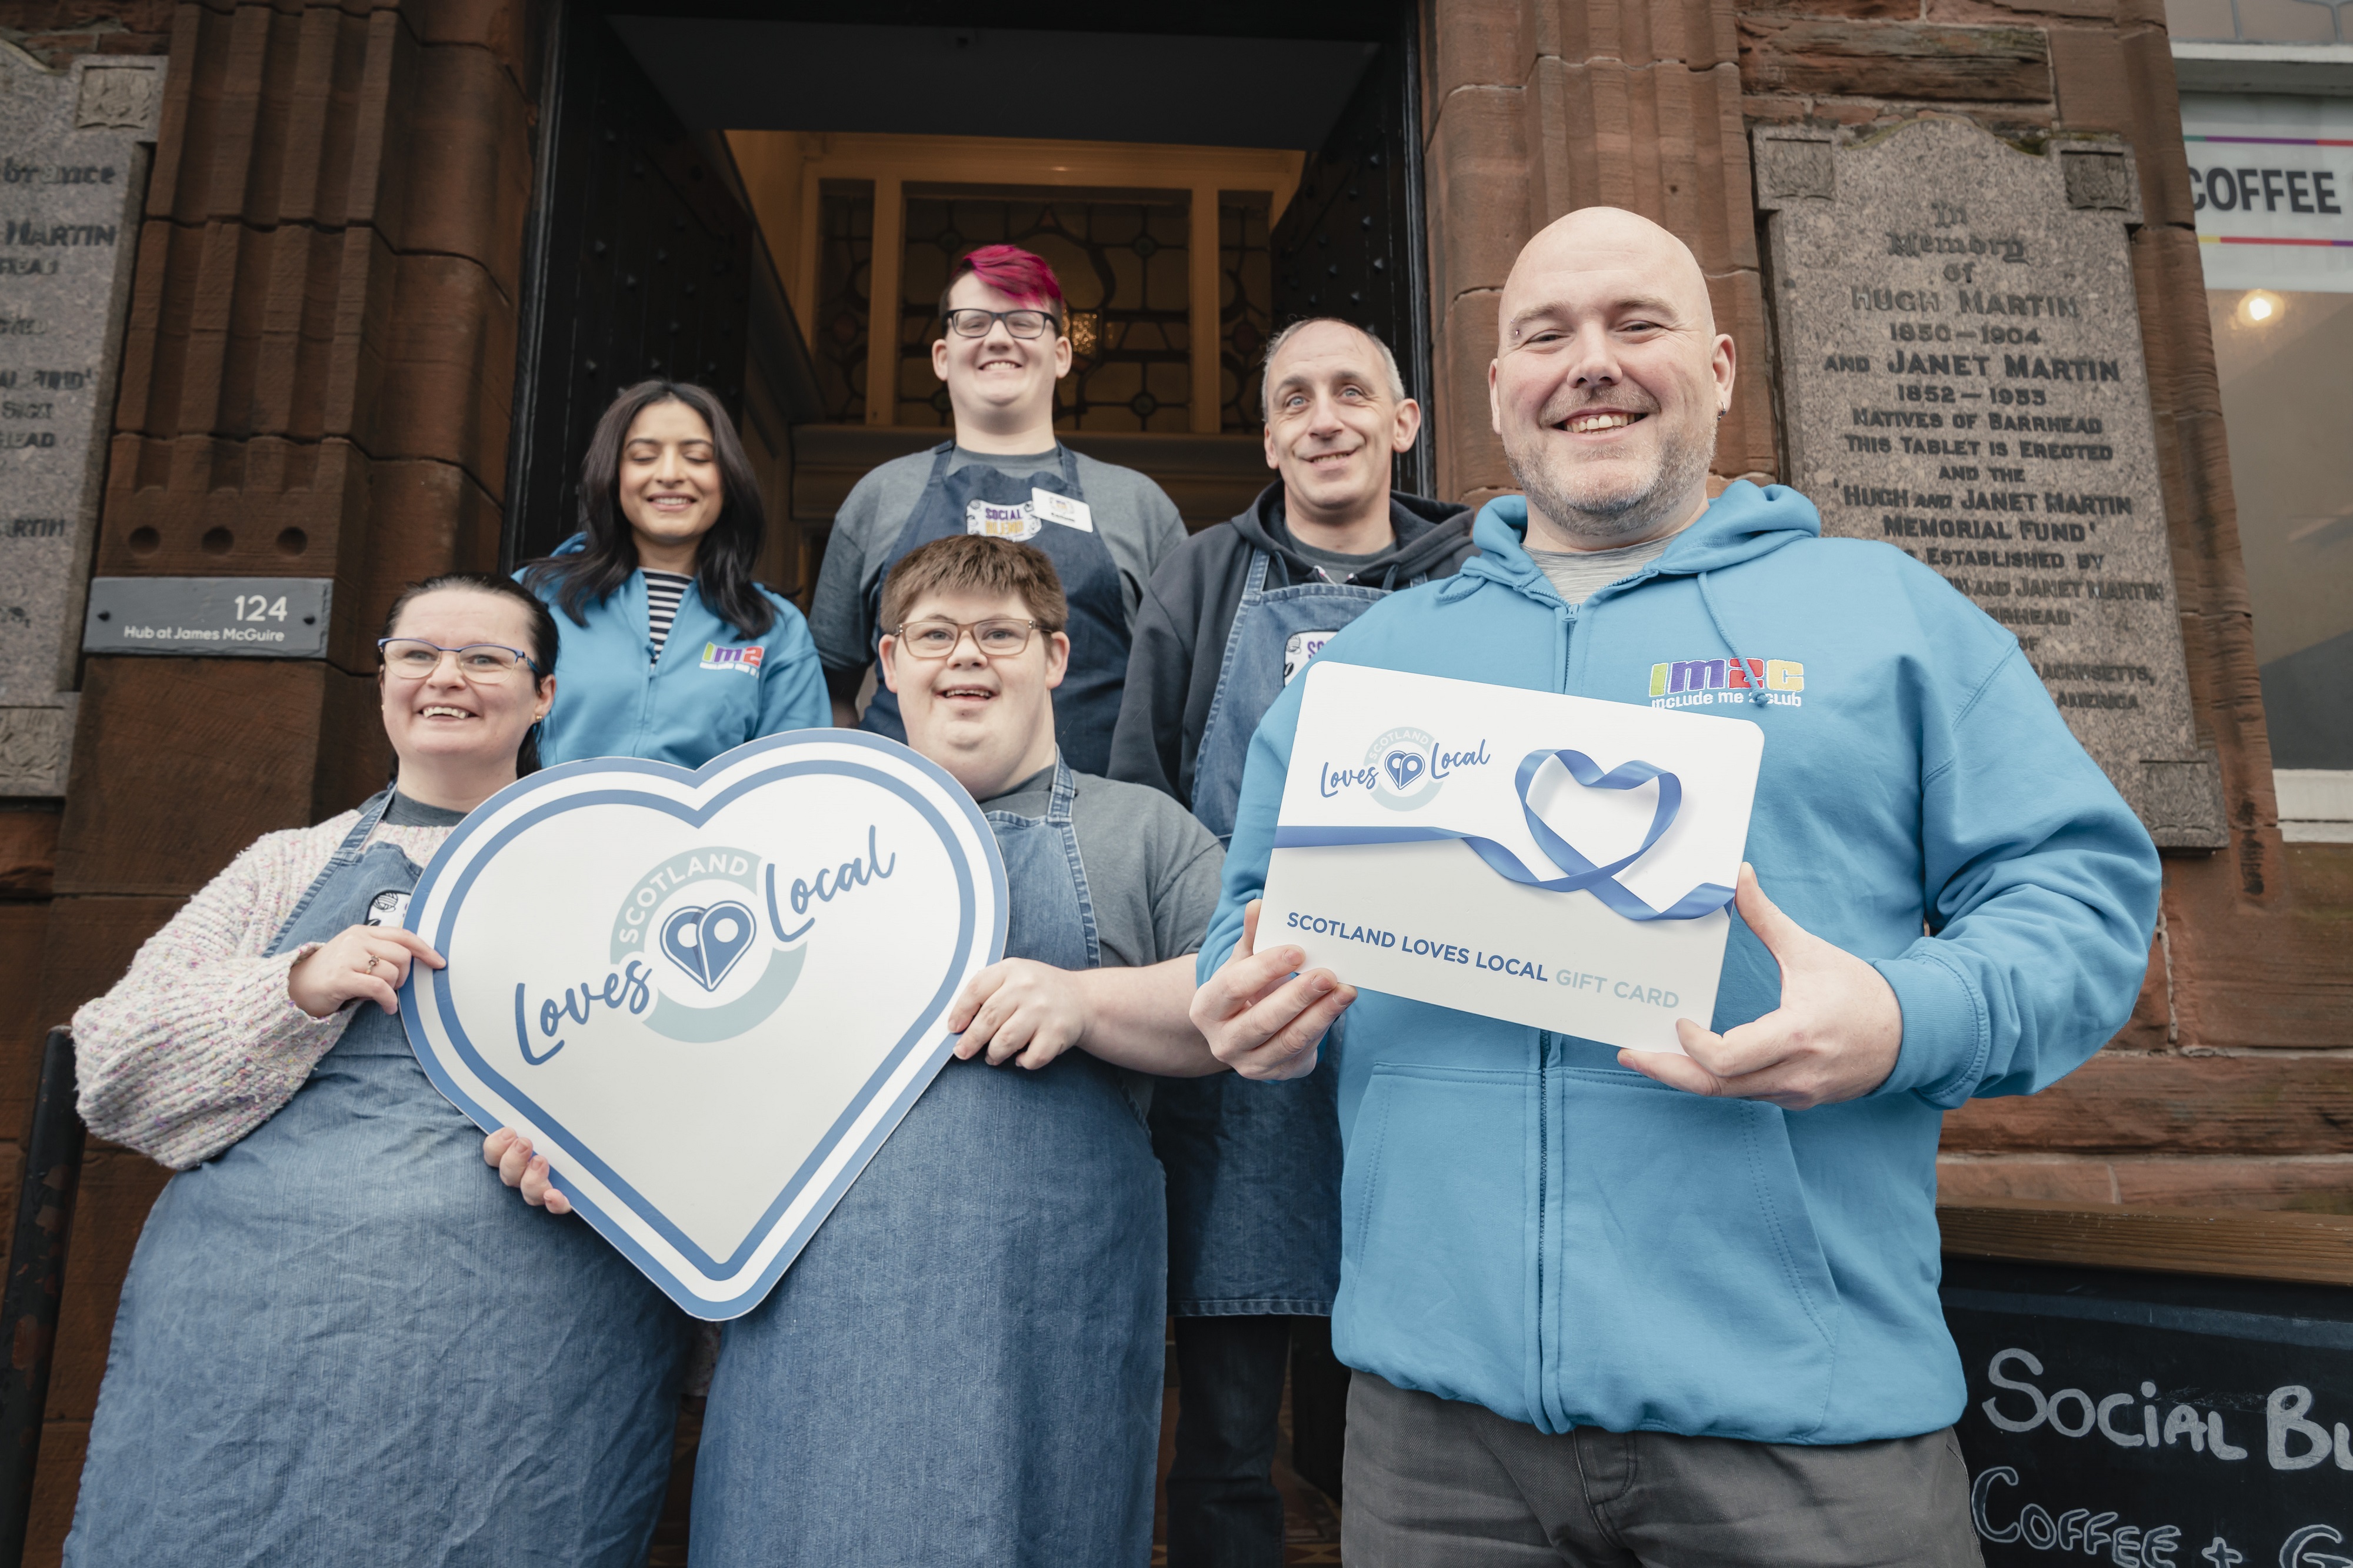 Scotland Loves Local Gift Card helps people and communities through cost of living crisis